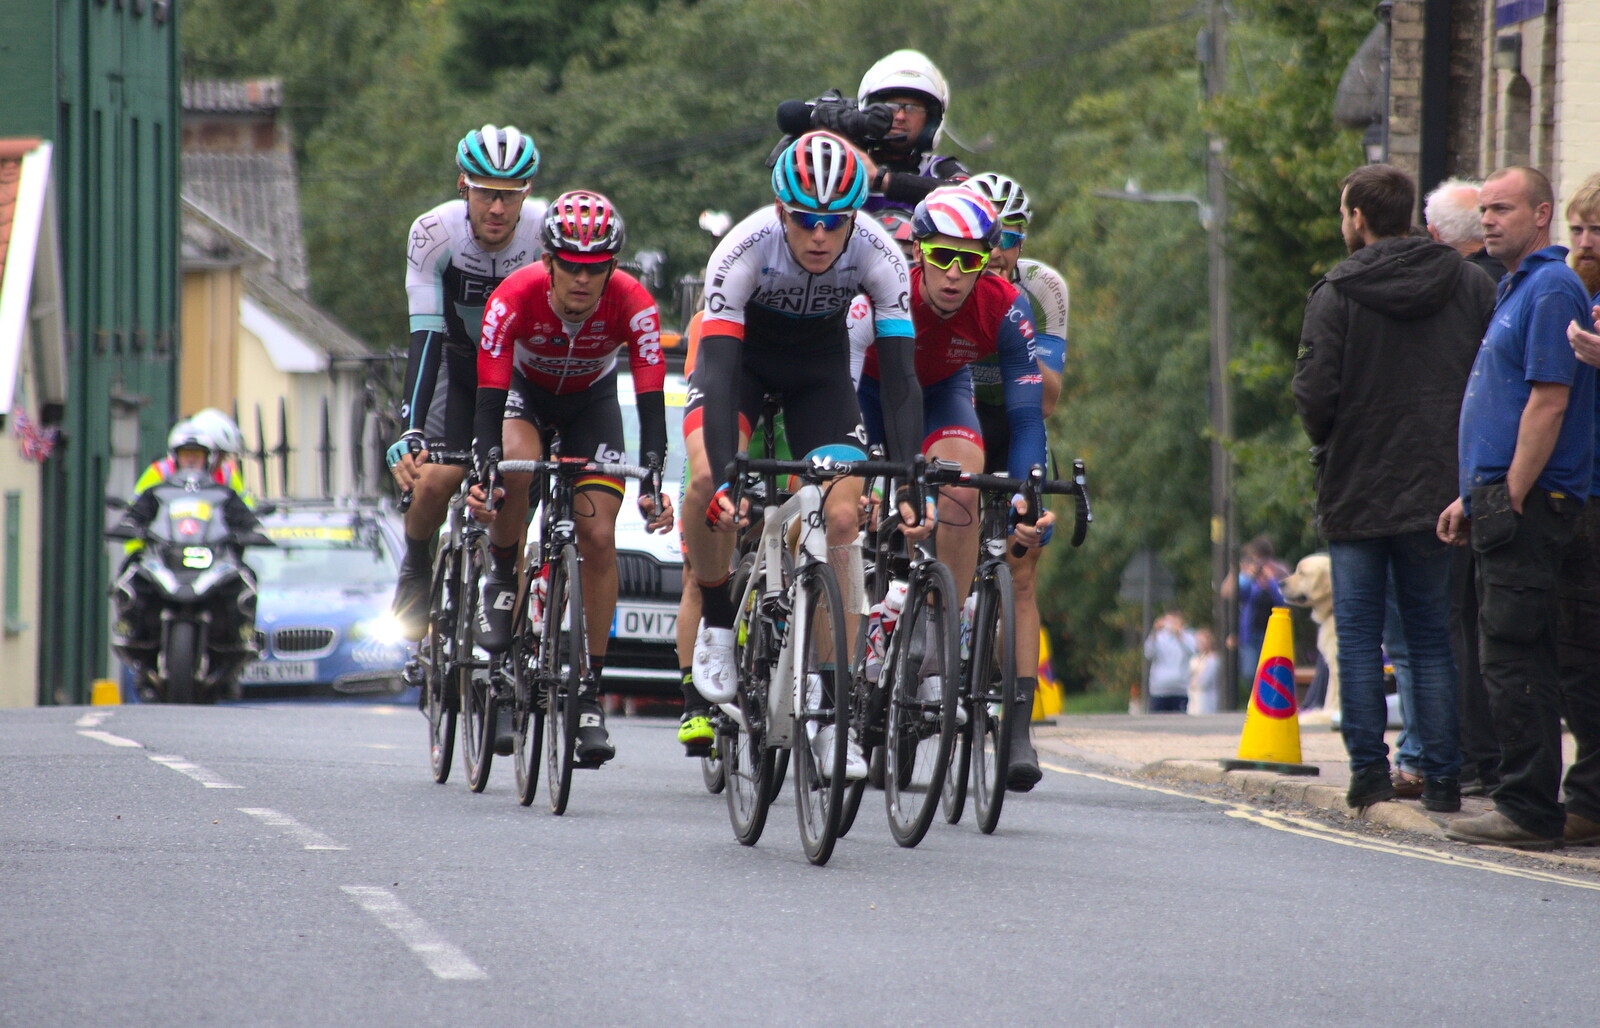 The lead peloton passes the chicken factory from The Tour of Britain Does Eye, Suffolk - 8th September 2017